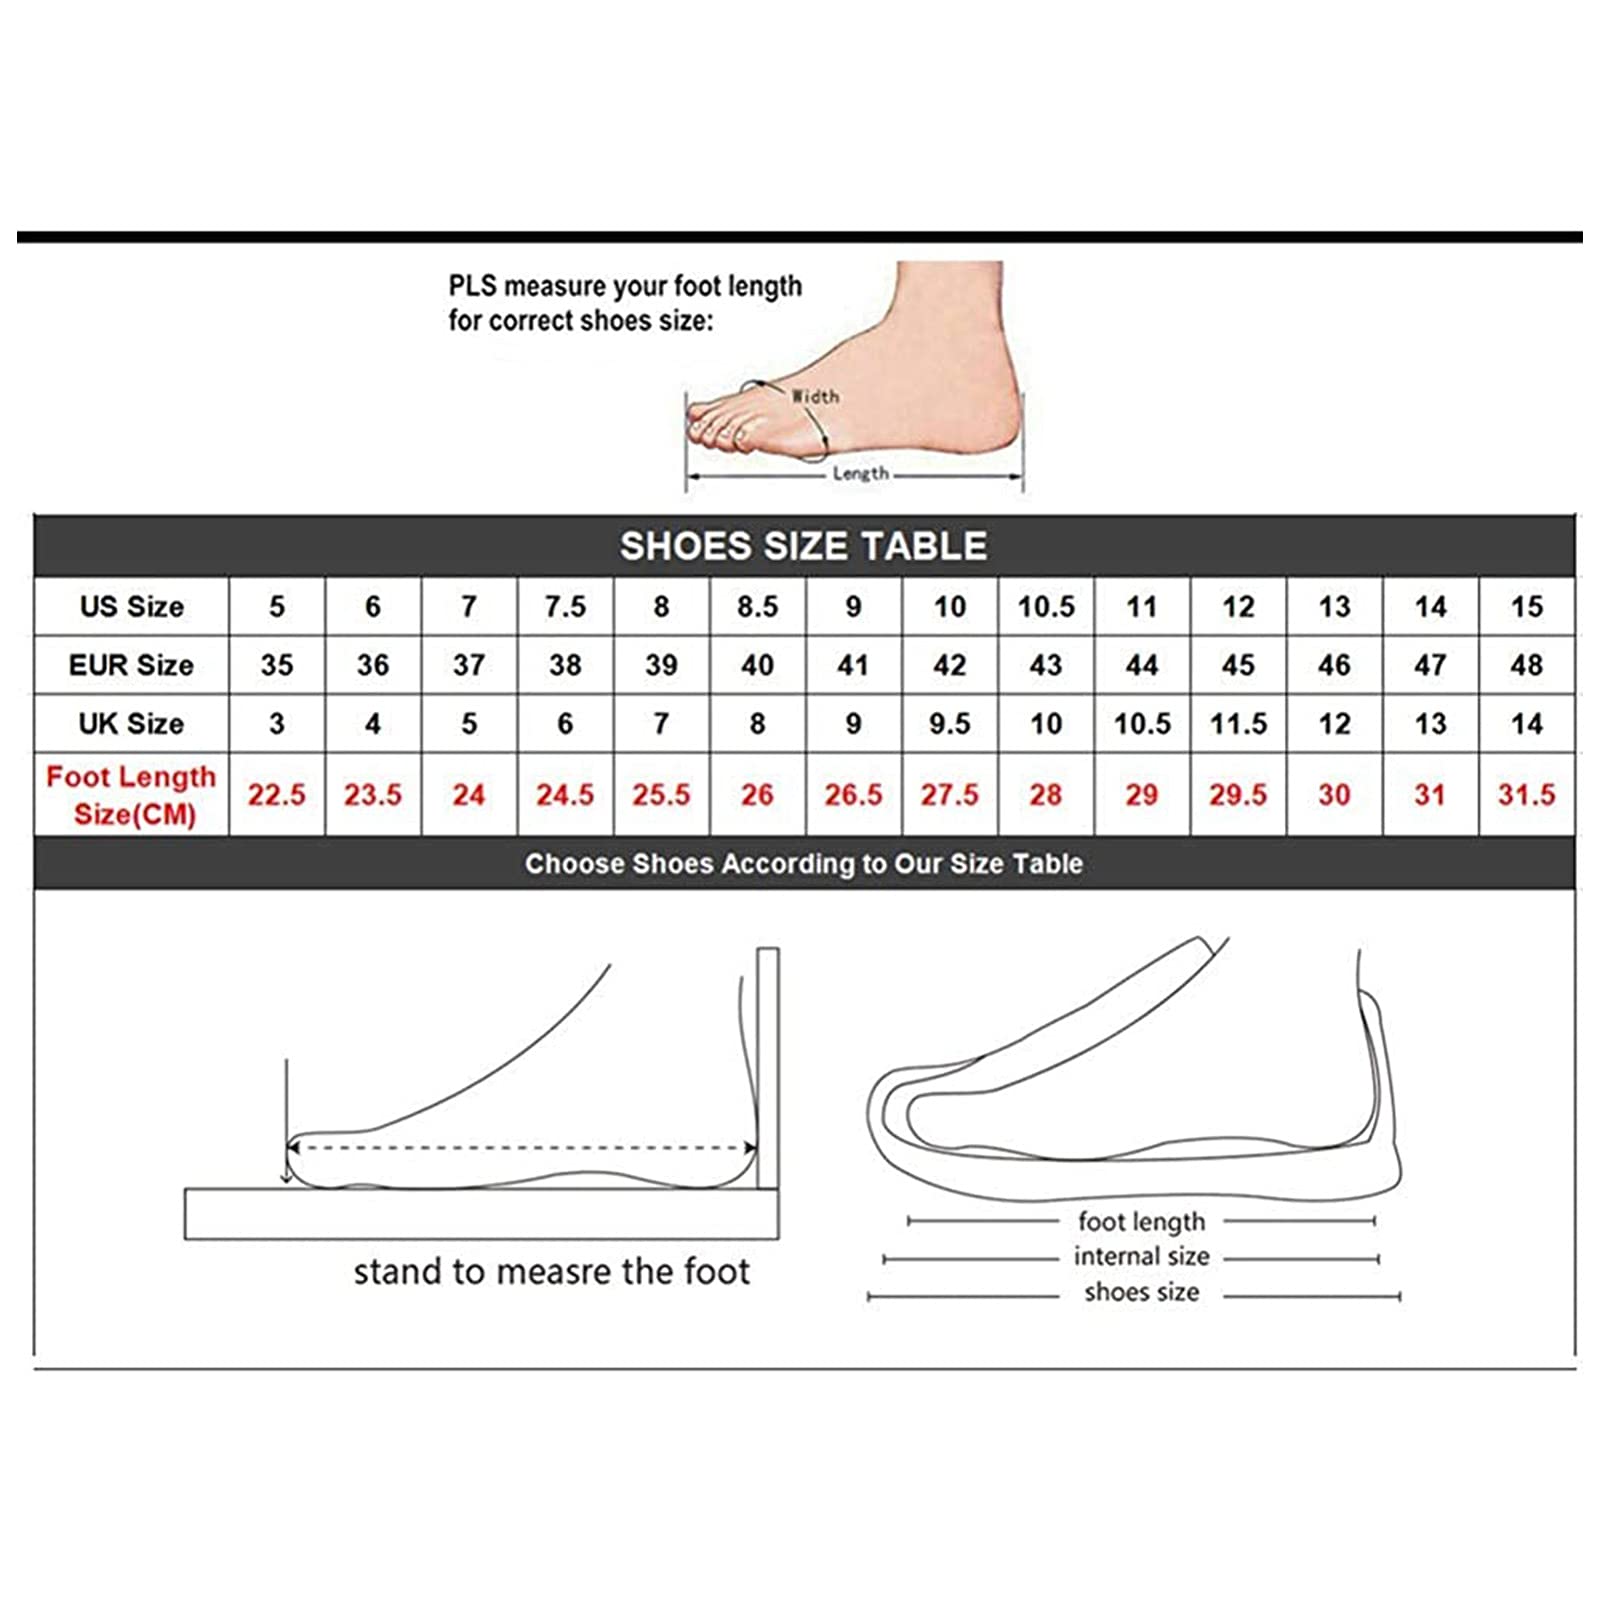 Jeiento Cherry Blossoms Shoes for Women Running Shoes Casual Breathable Walking Shoes Sport Athletic Sneakers Gym Tennis Shoes US 8.5